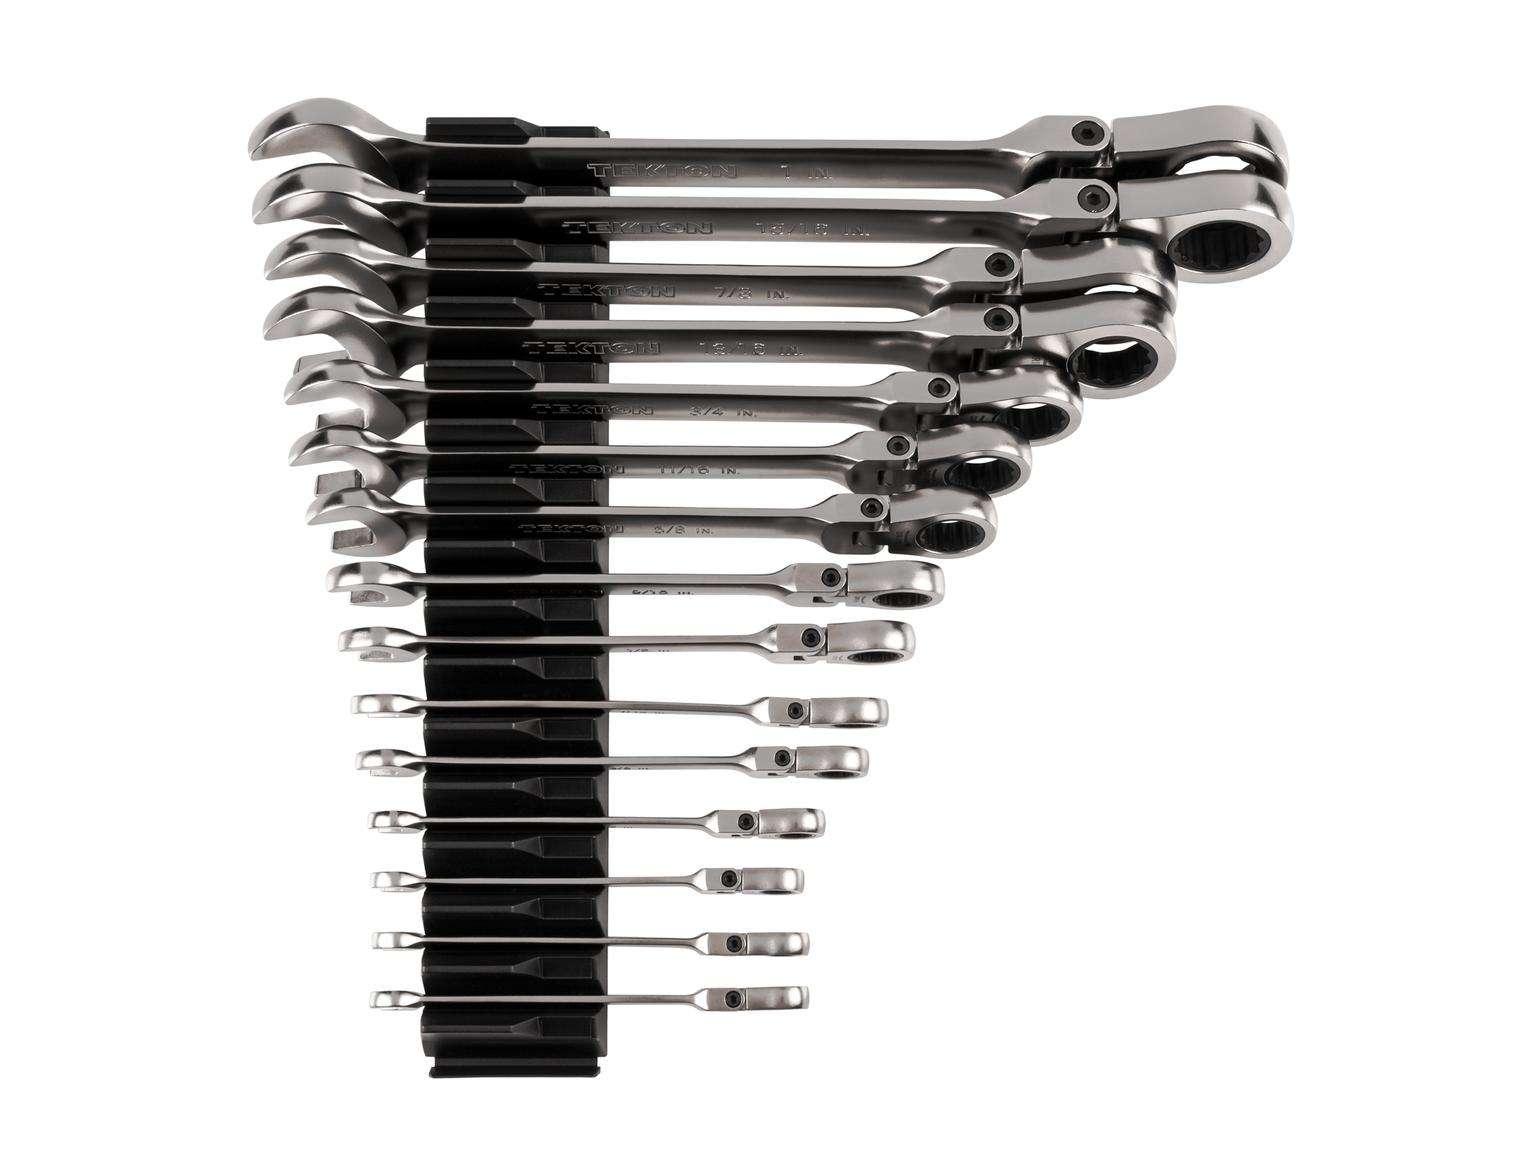 Flex Head 12-Point Ratcheting Combination Wrench Set, 15-Piece (Modular Slotted Organizer)